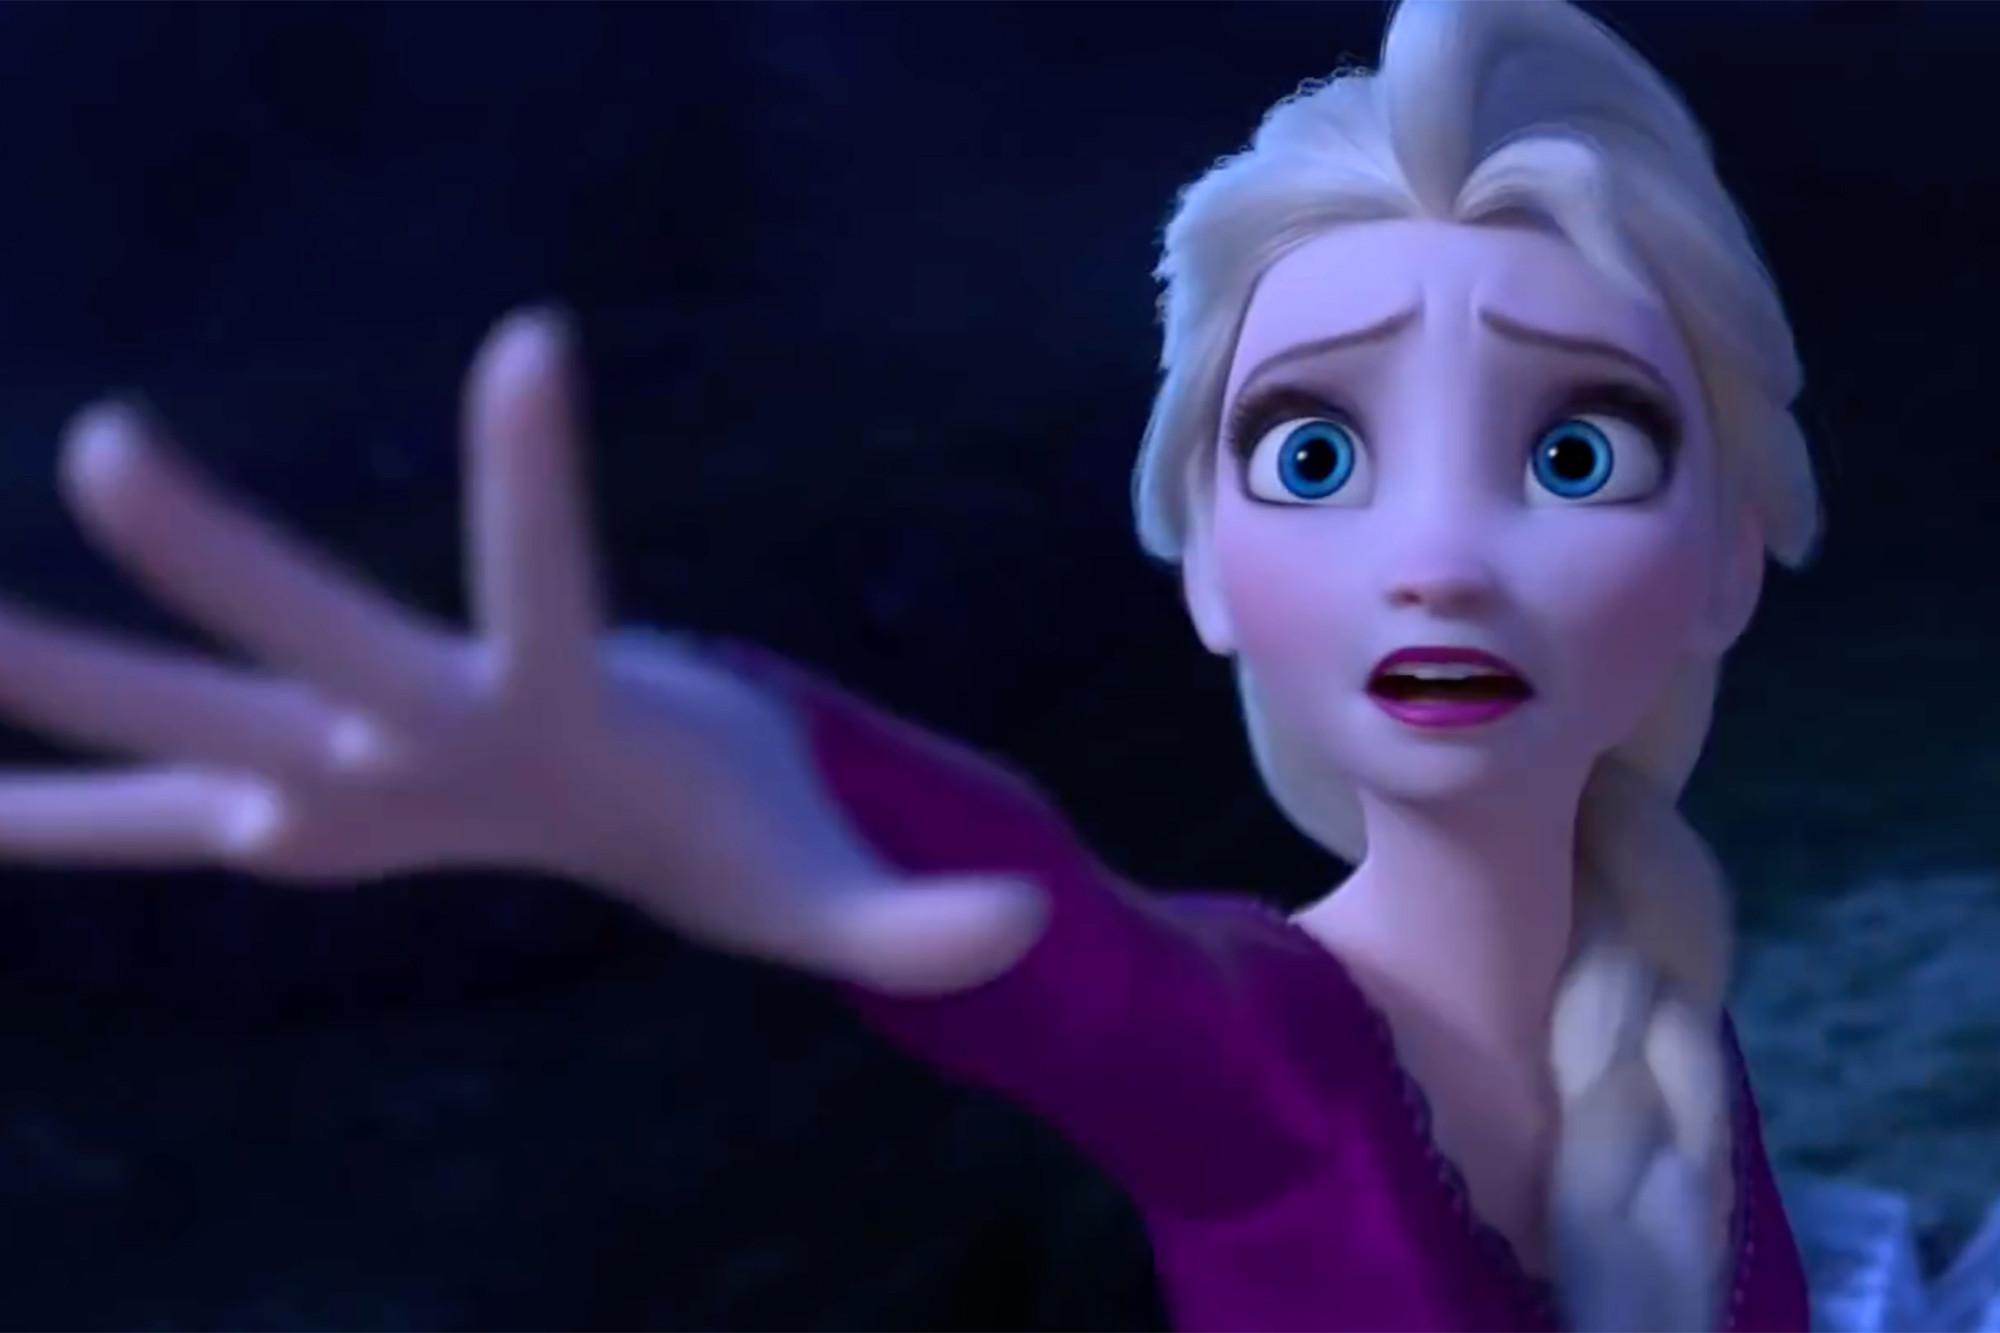 Frozen 2' trailer: Elsa and Anna on journey to save Arendelle